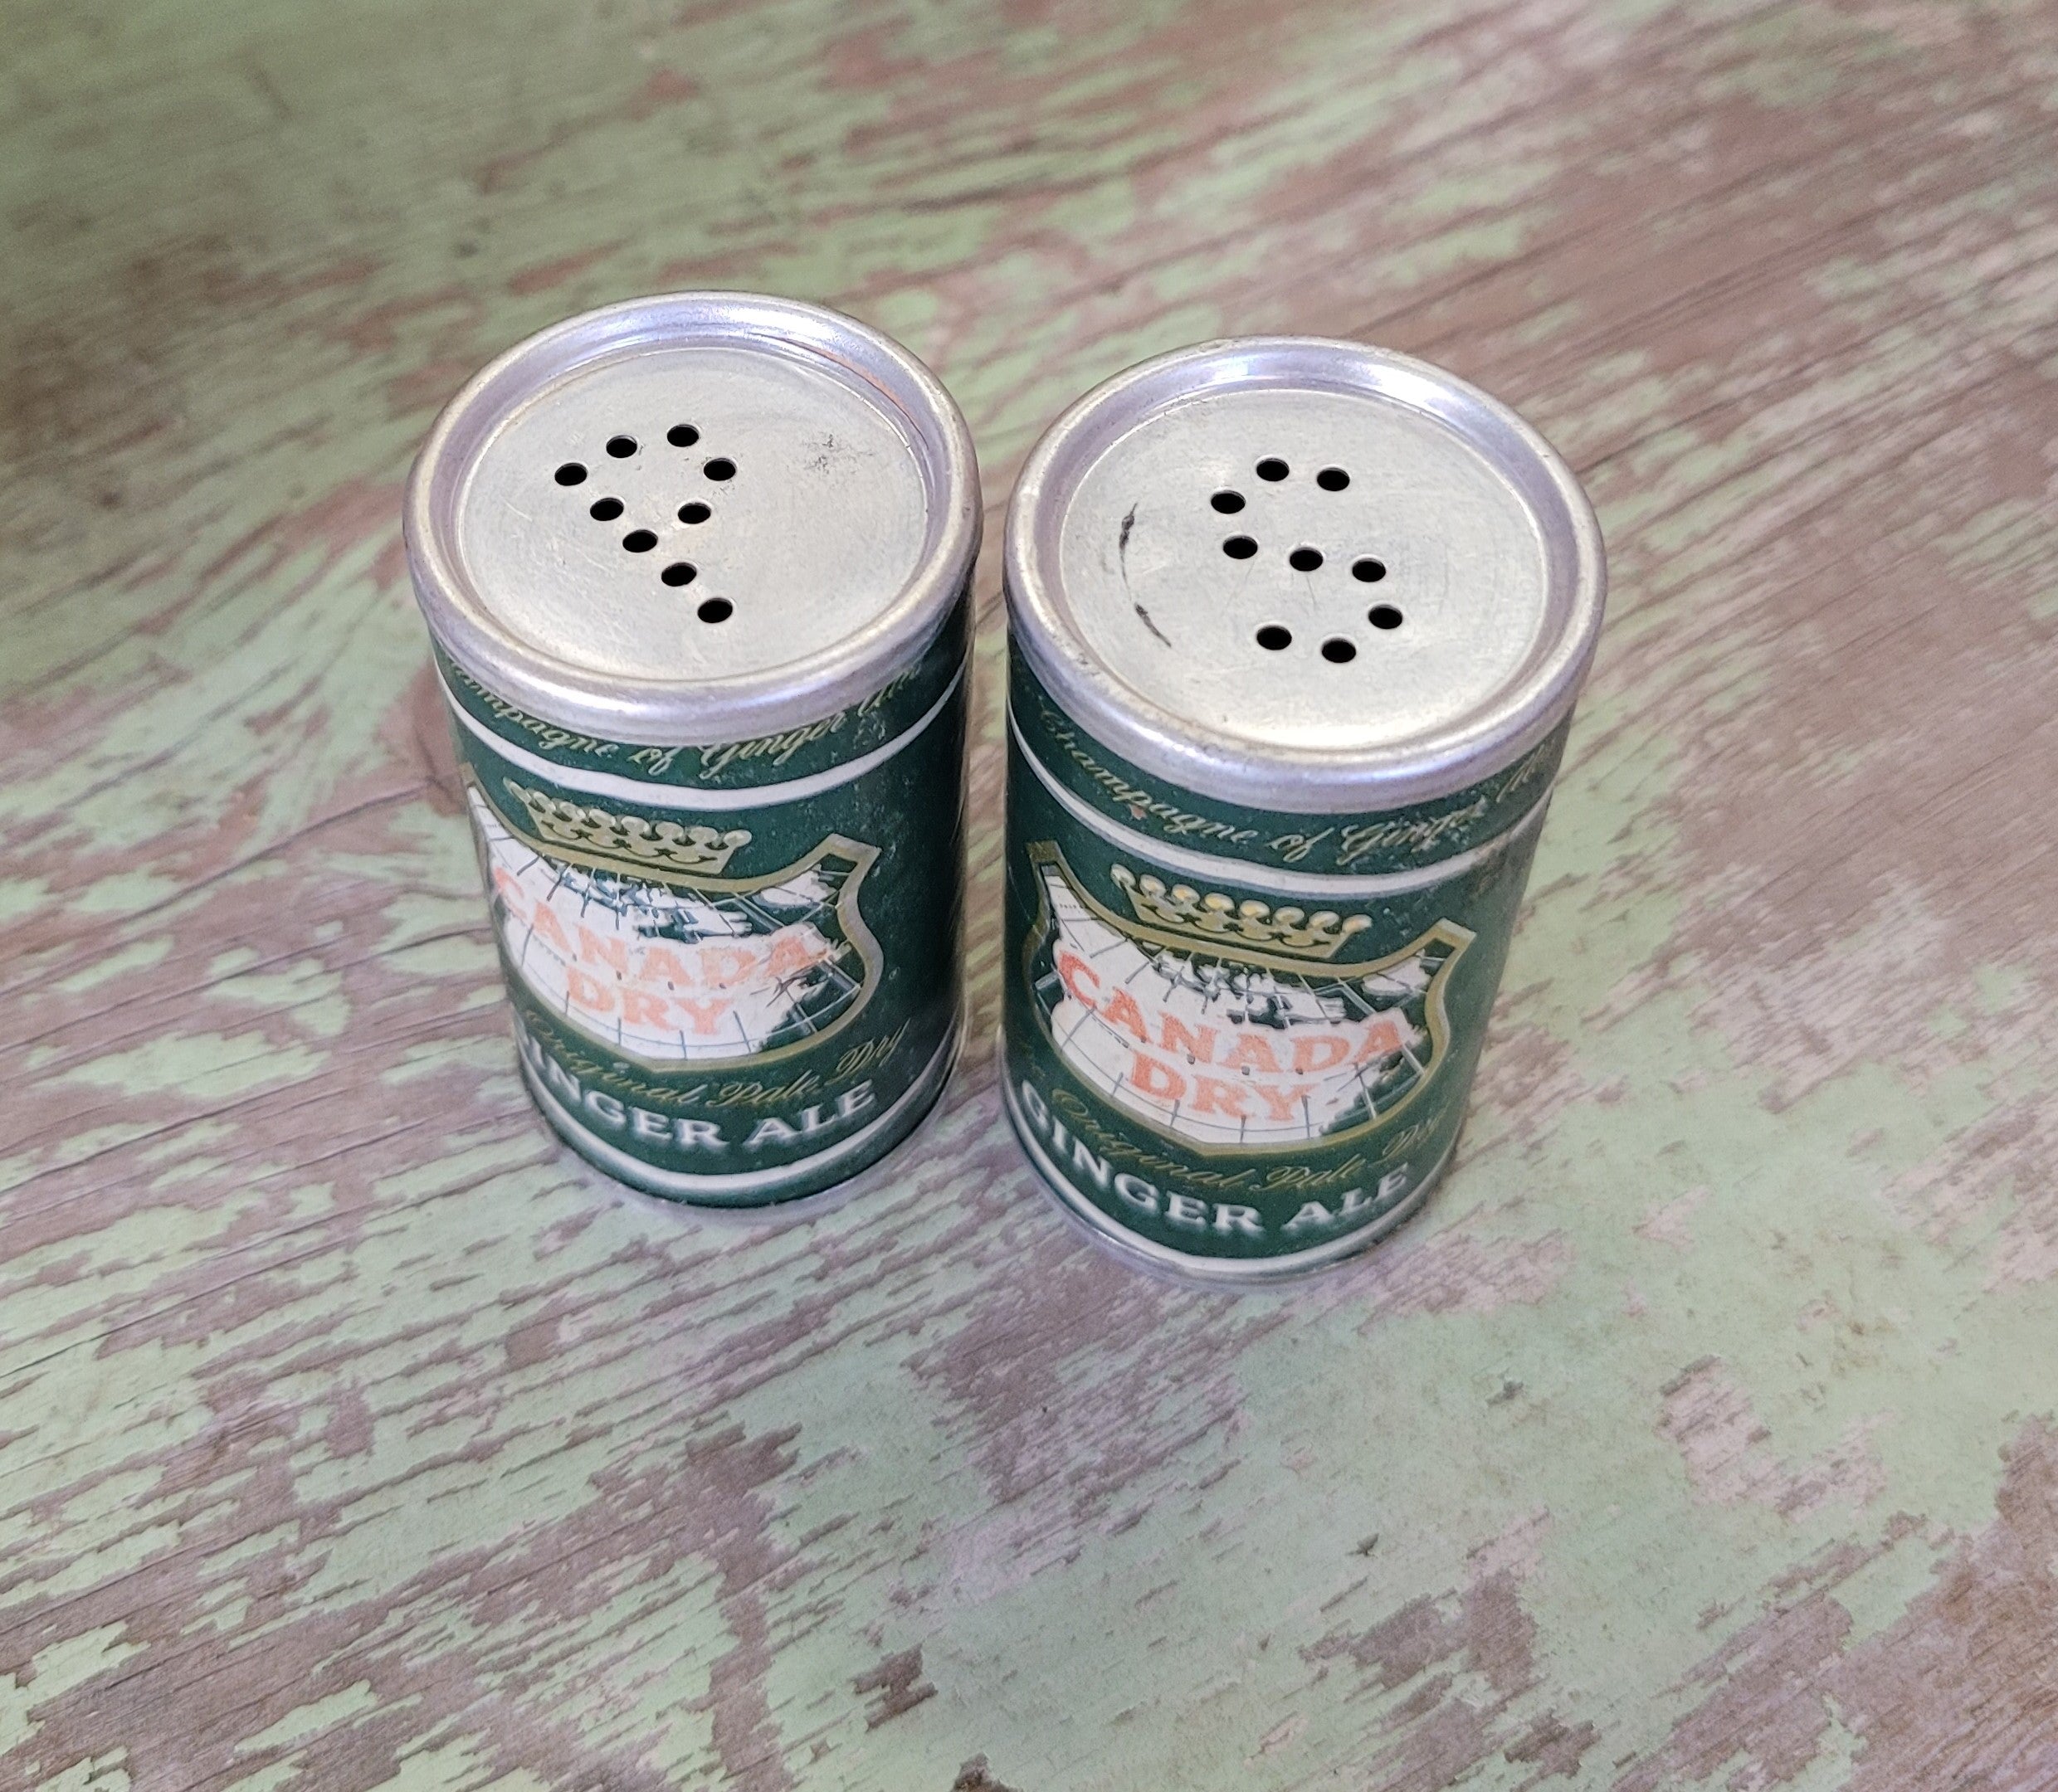 Canada Dry Ginger Ale Salt & Pepper Shakers